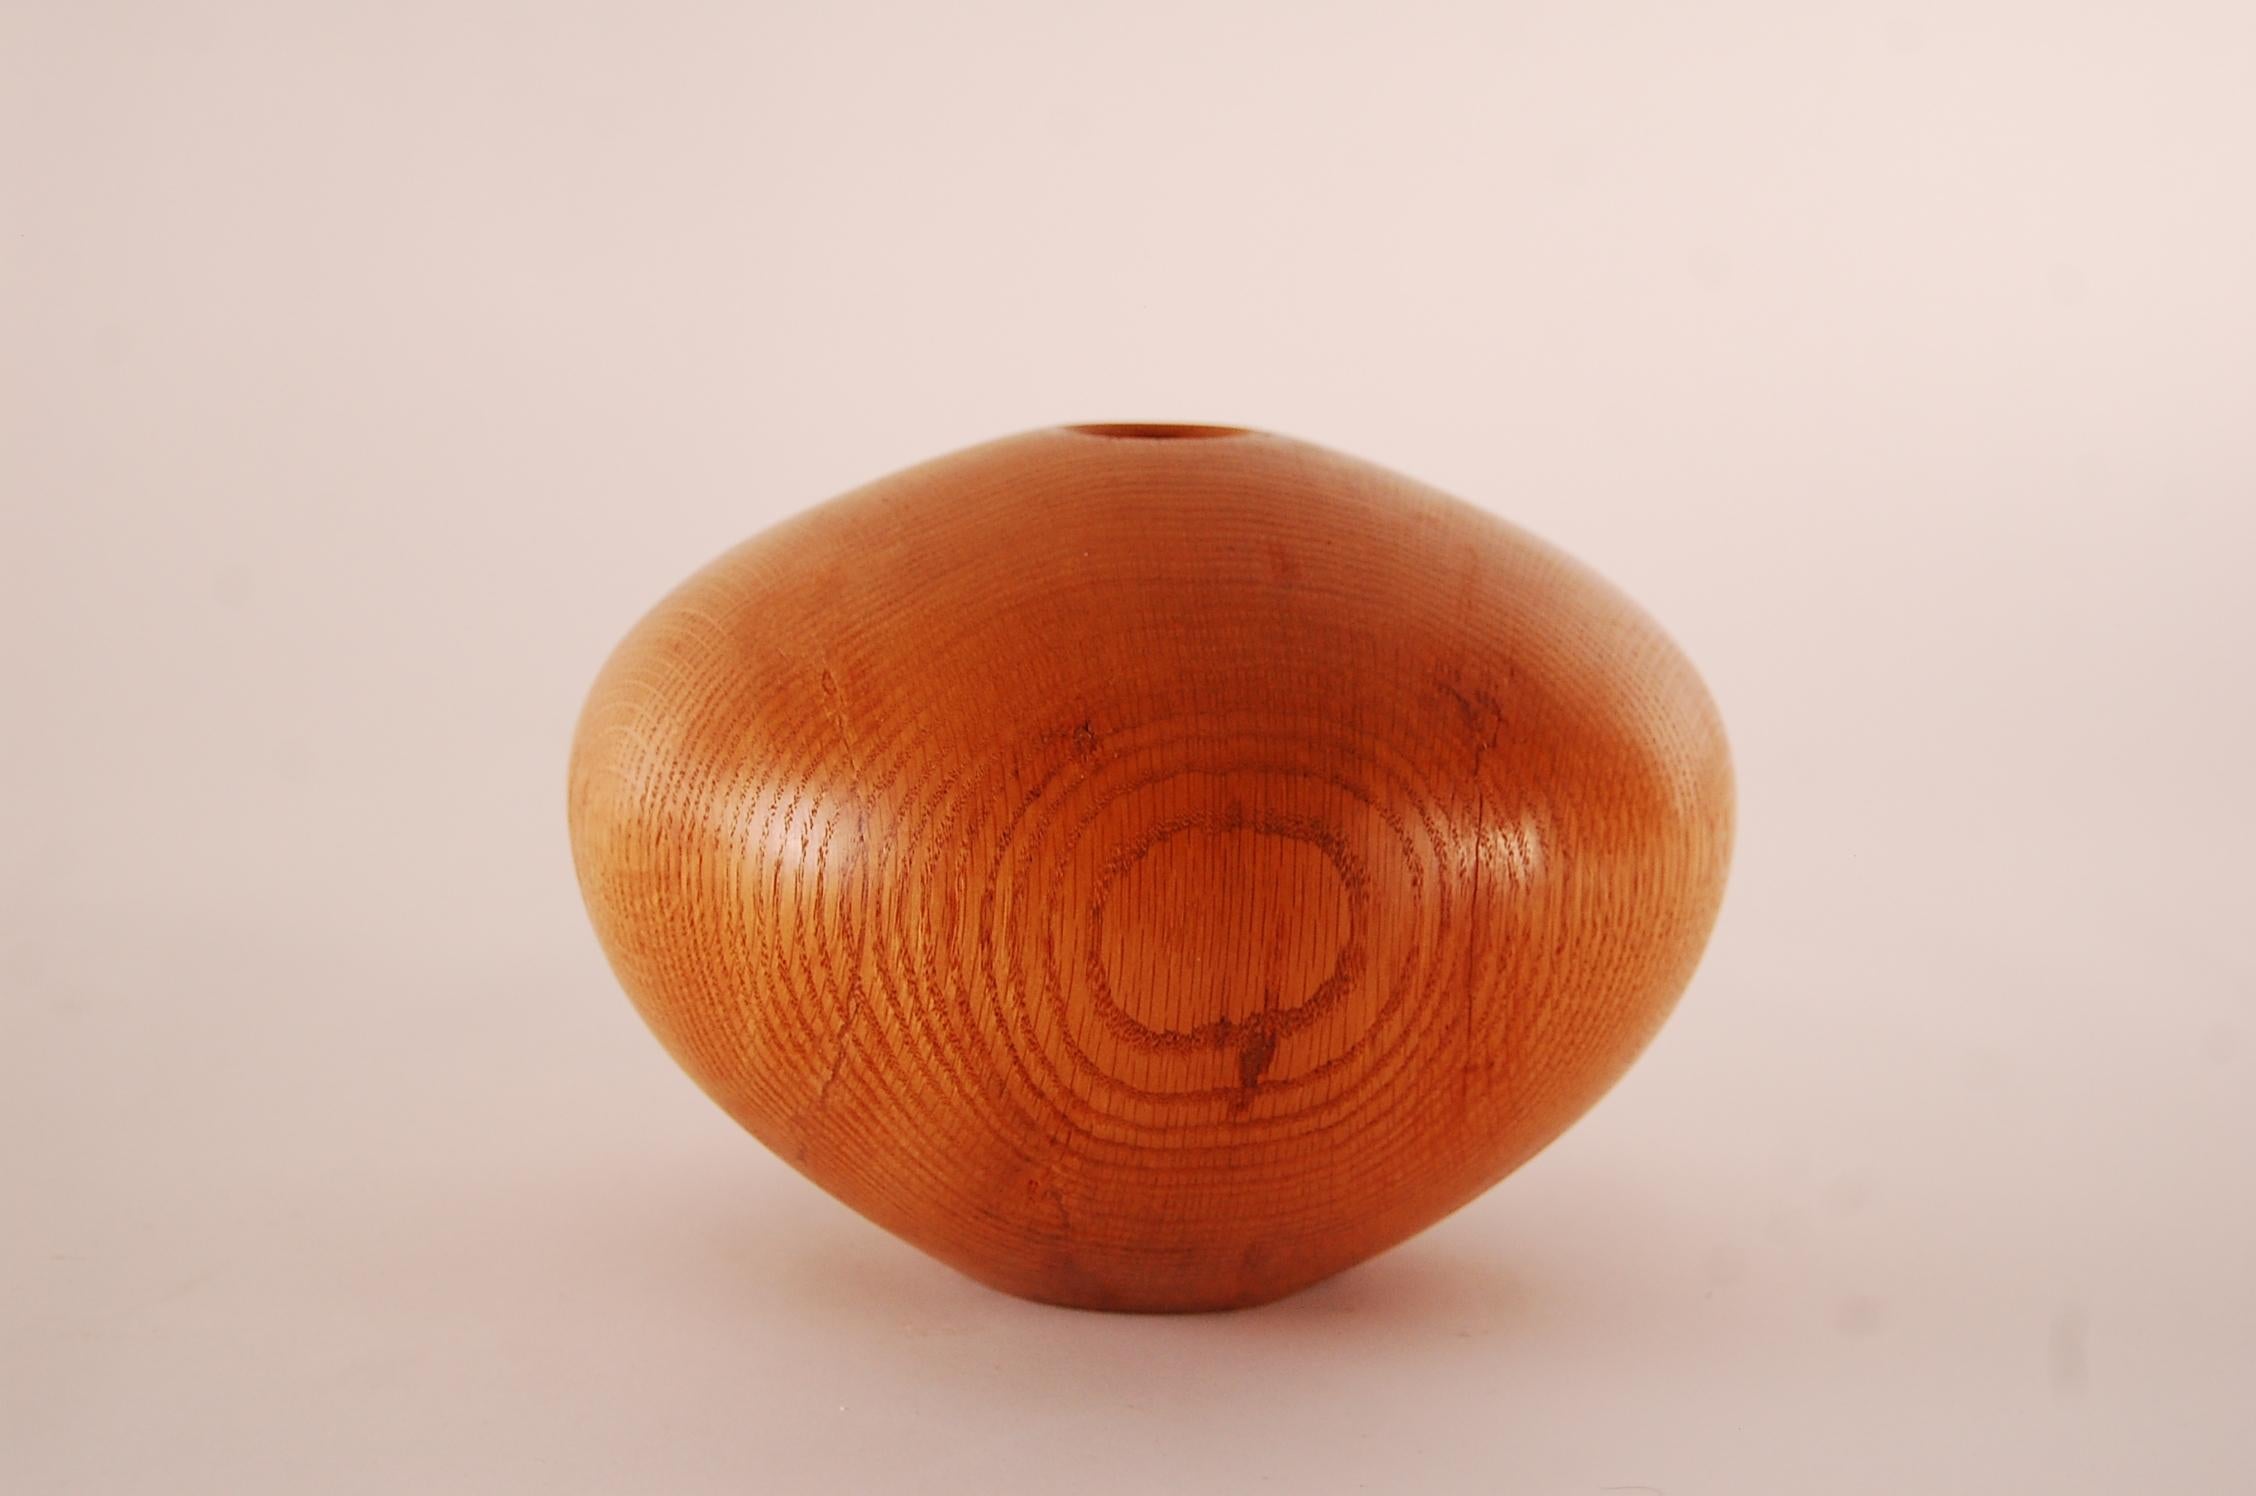 American Craftsman Hollow Form Vase by Ron Pessolano